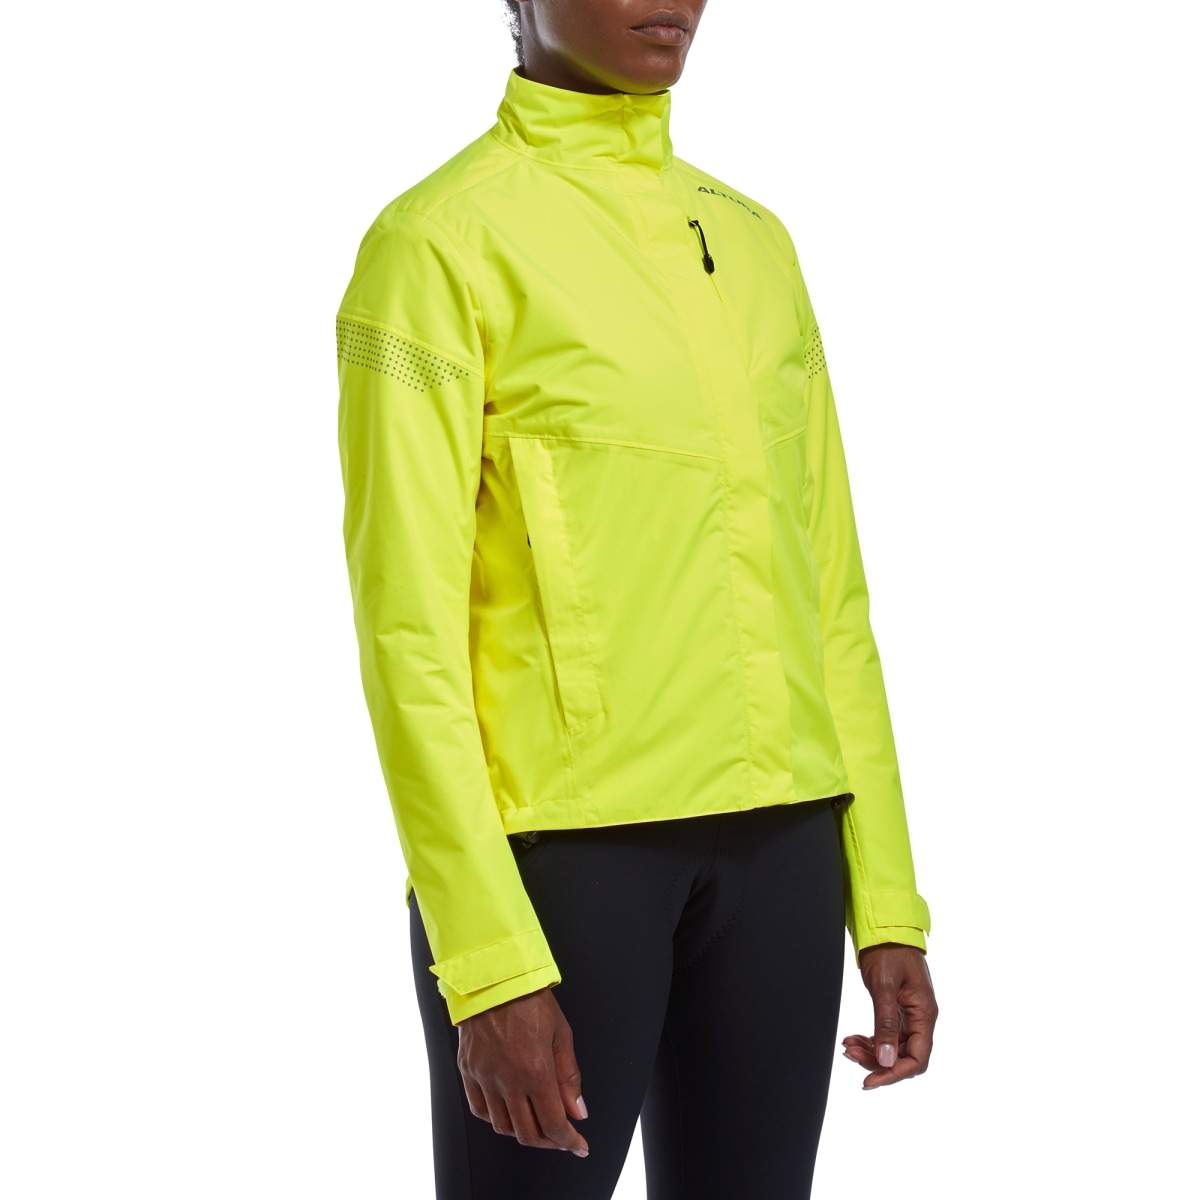 Cycles UK Altura  Nevis Nightvision Womens Jacket 16 YELLOW